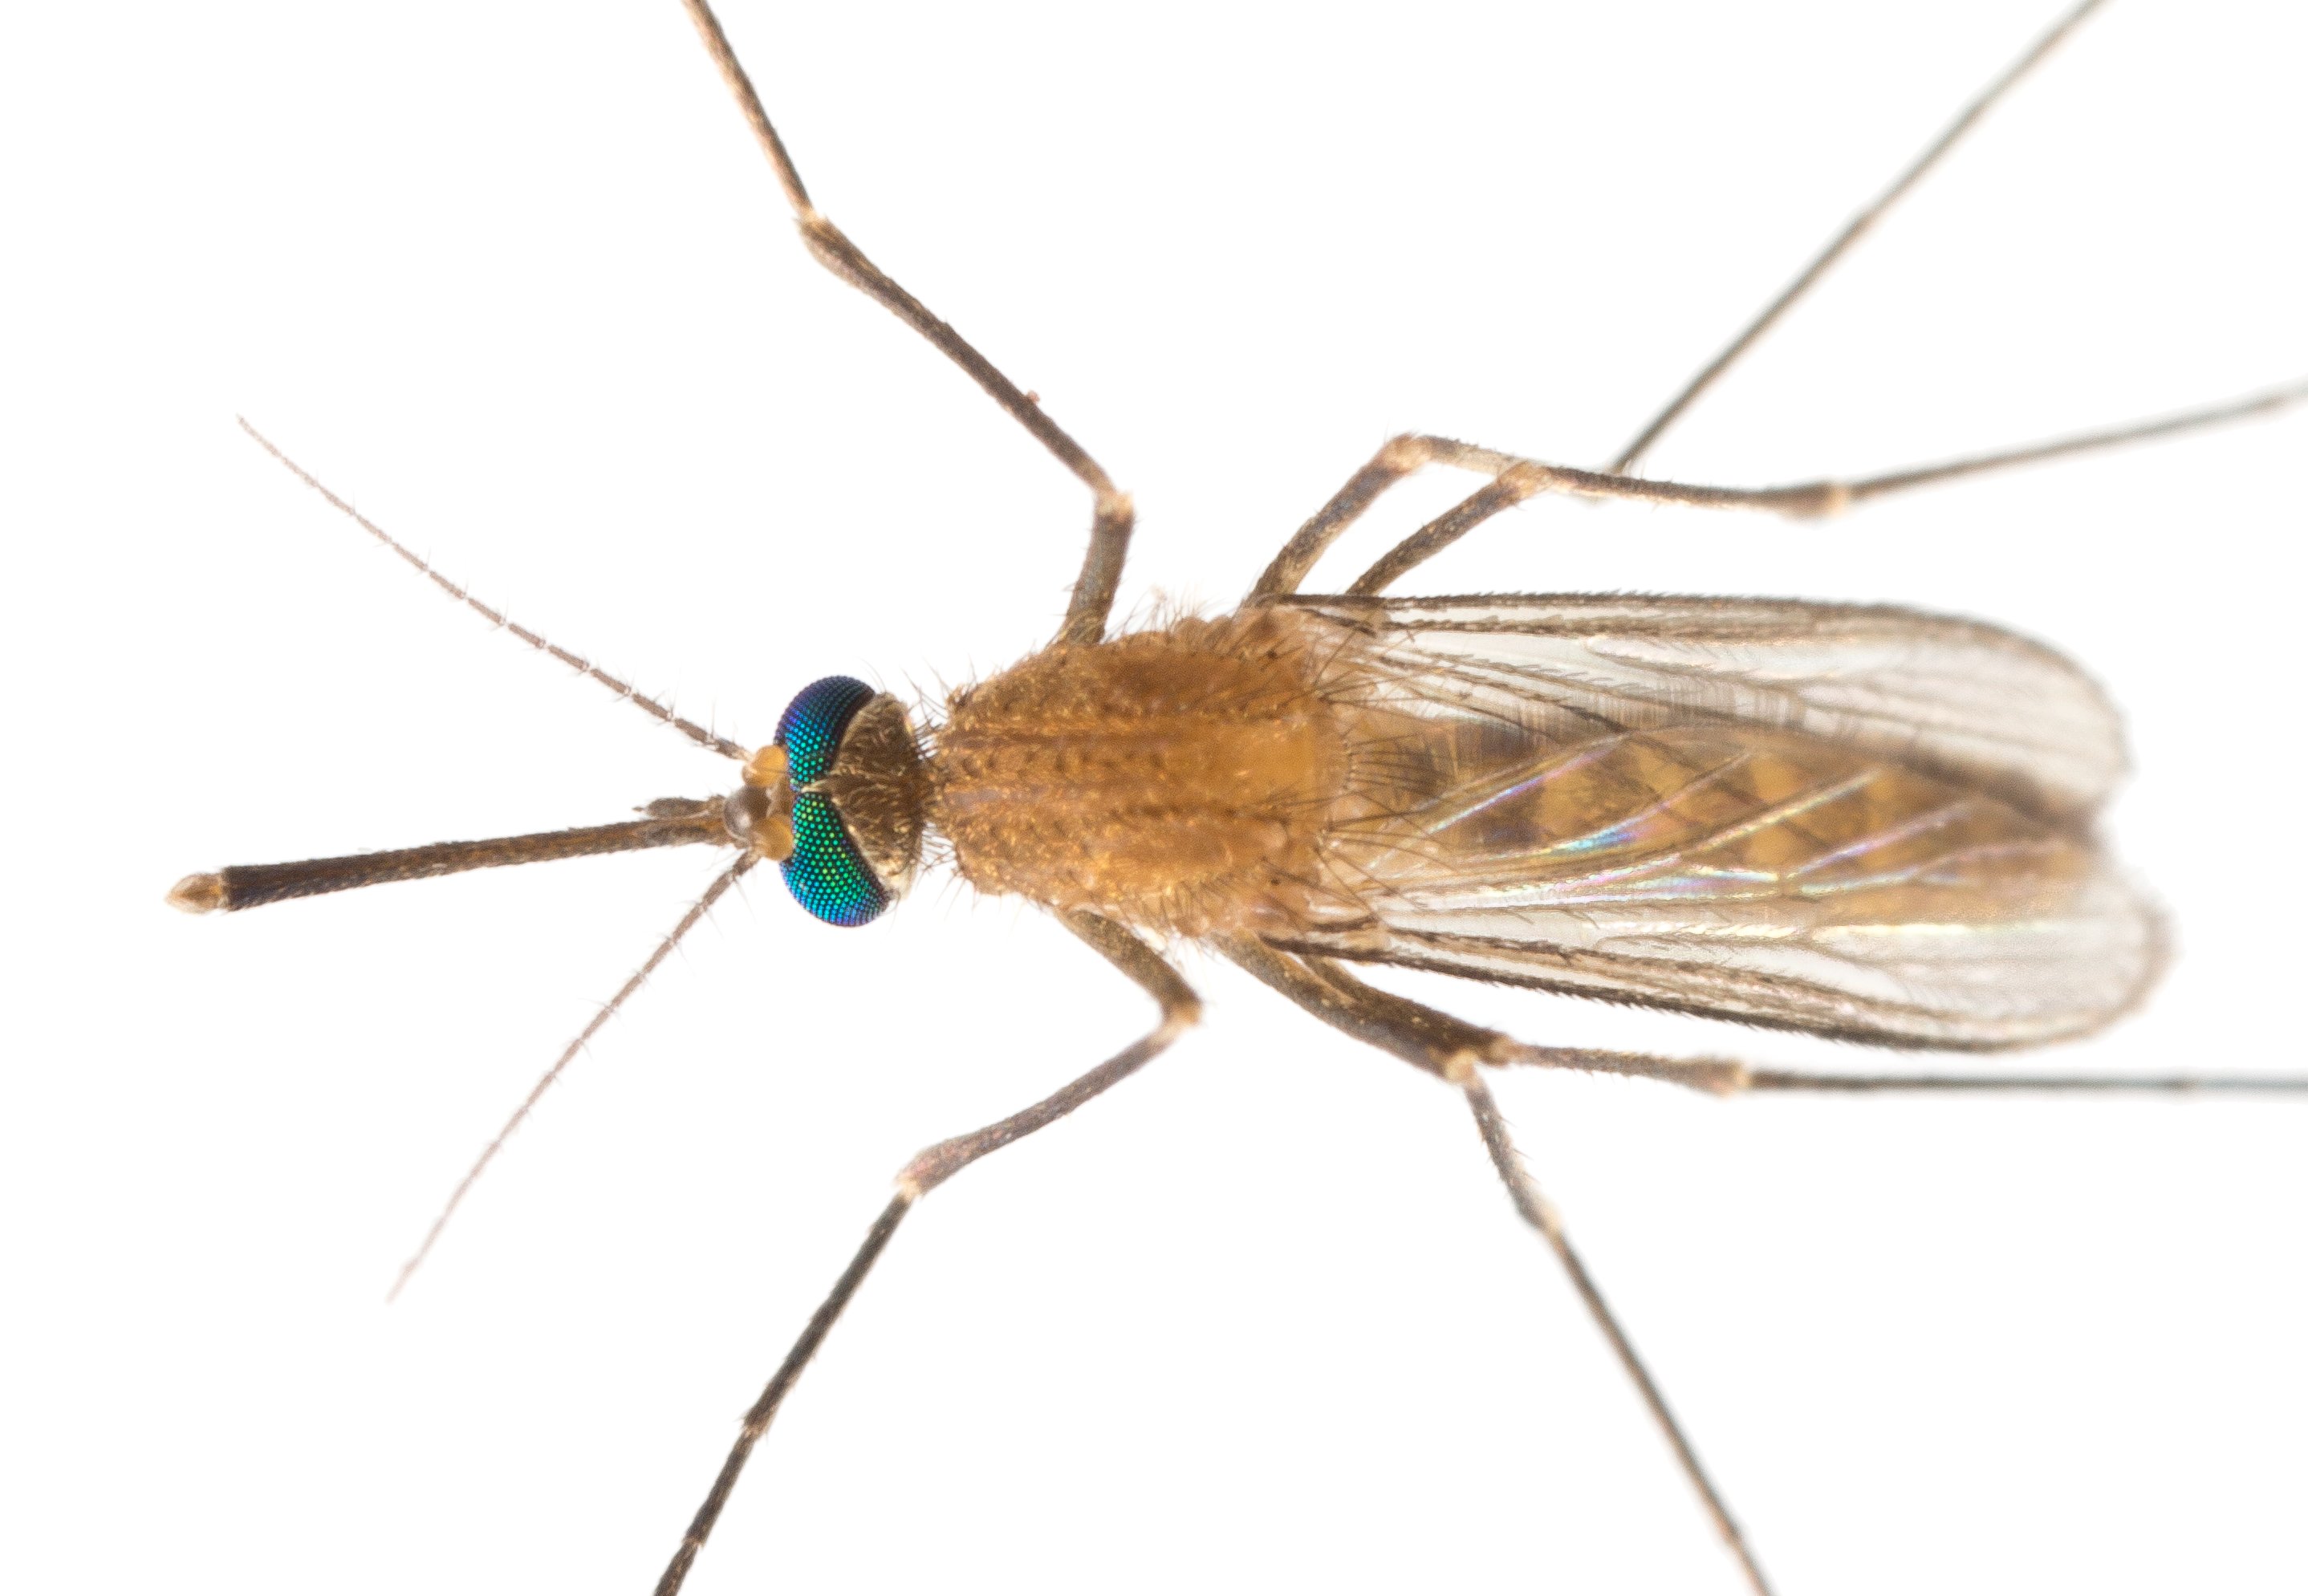 As a species that does not need blood meals to reproduce, Culex pipiens provide a great comparison for the researchers as they study mosquito endocrinology. With their striking blue-green eyes, they also make a great photography subject. (Photo by Jena Johnson)